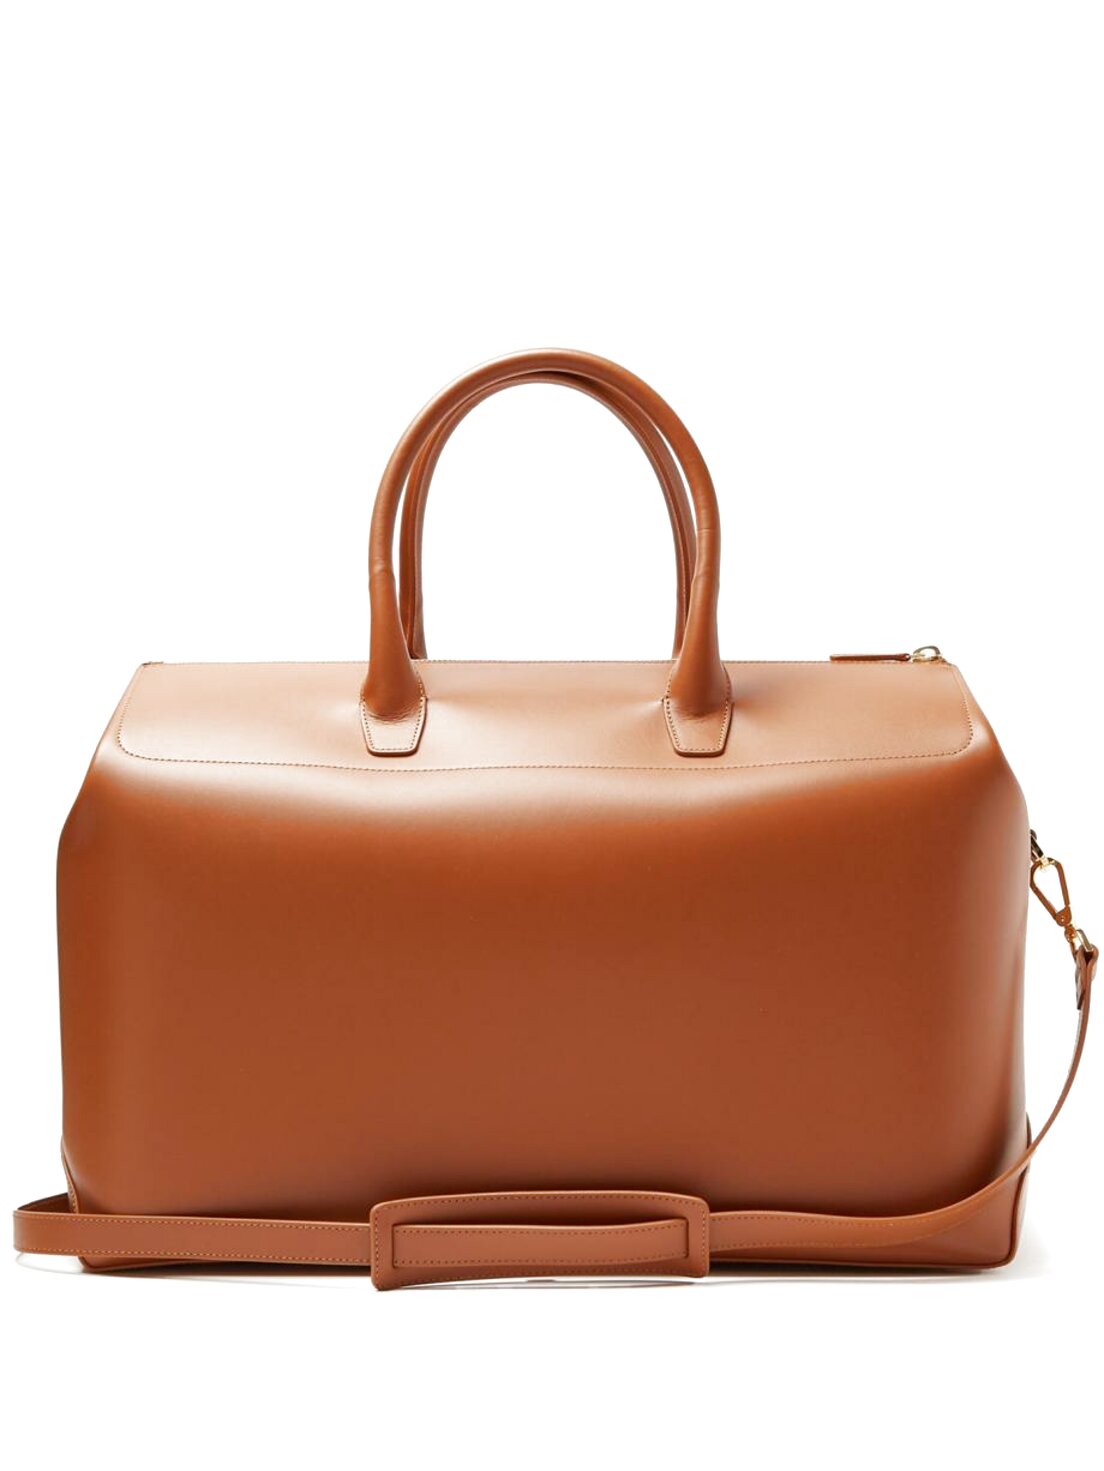 Womens Leather Holdall for sale in UK | View 63 bargains